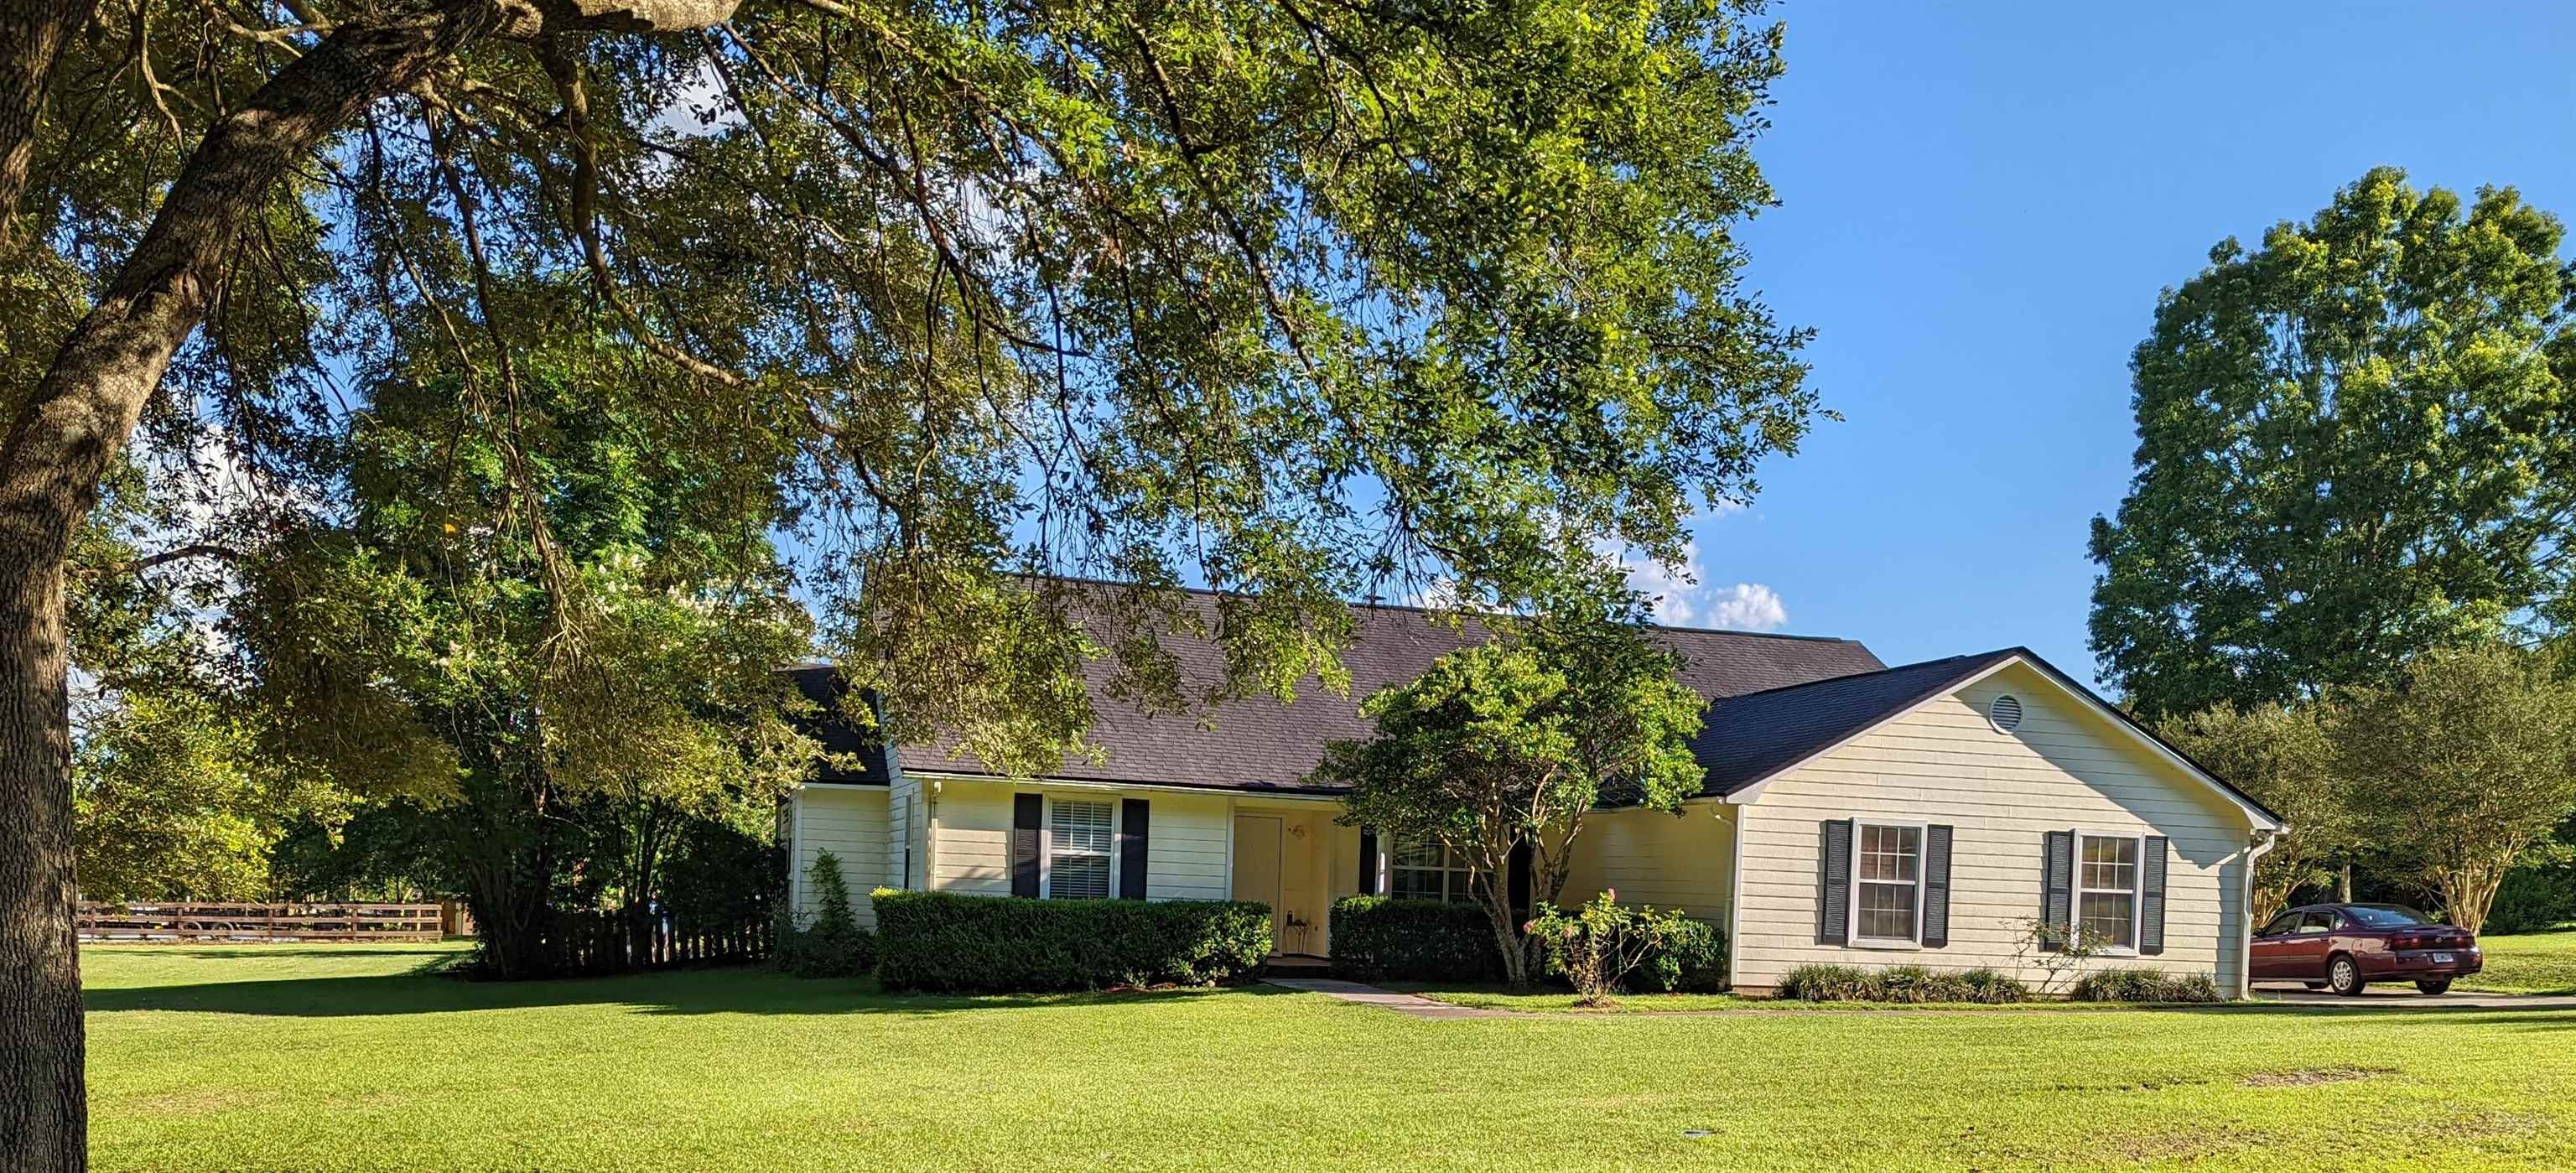 Perfect family home! 4 bedrooms, 2.5 baths, 2-car garage, 1.05 acres, screened-in porch overlooking beautiful backyard with swimming pool, small lake and fantastic view! Split plan. Large kitchen with super size pantry! Roof in 2013! 2021 Stainless Steel kitchen appliances!  New pool liner in 2018.  The walls have a fresh coat of paint.   New carpet in all bedrooms and hallway.  AS IS.  Must see! Must see!